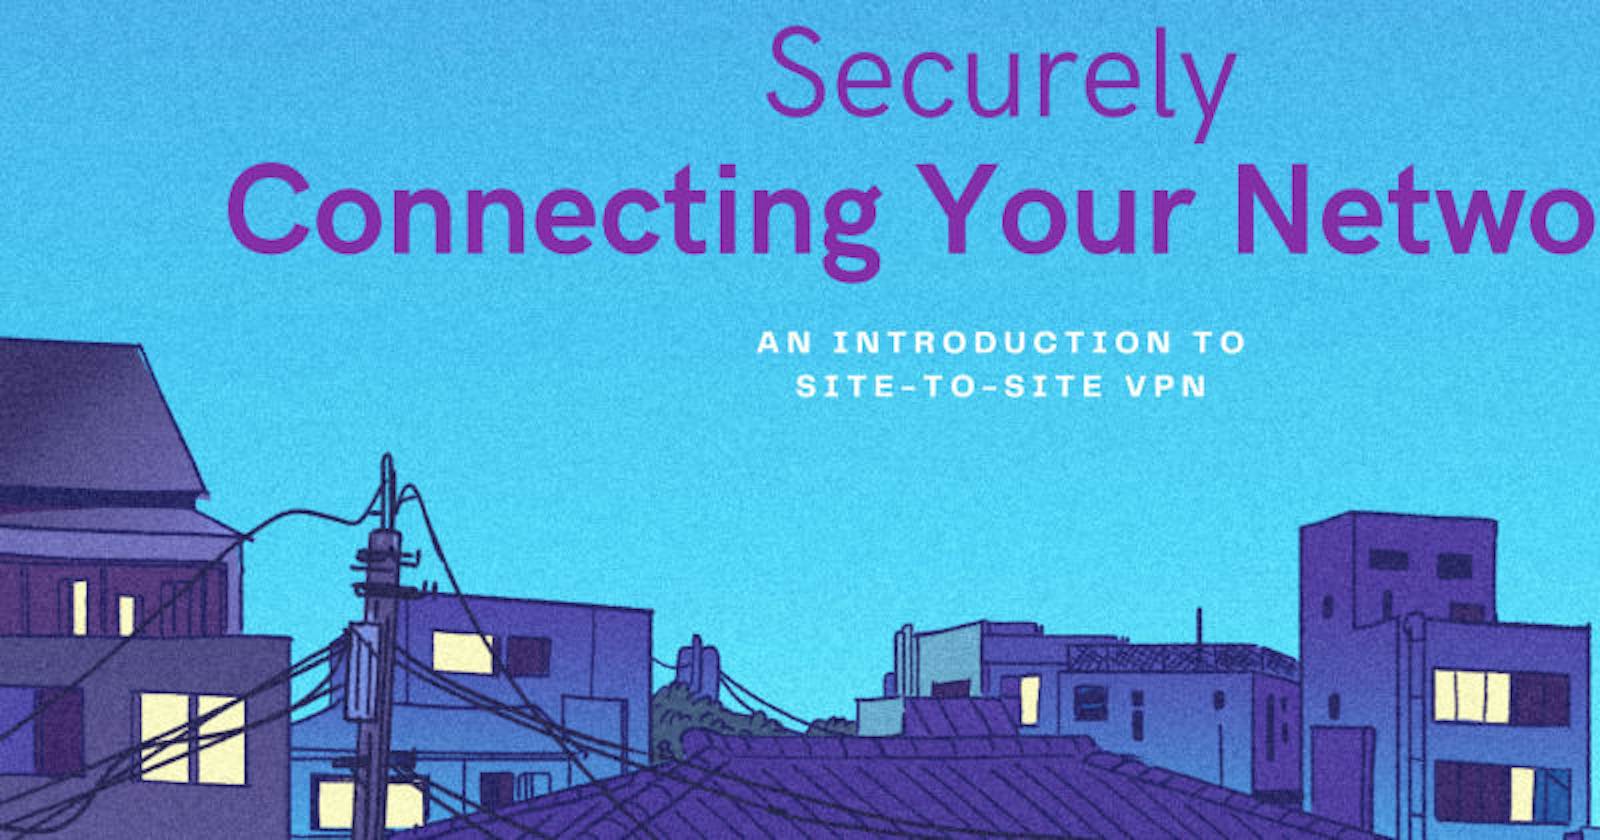 Securely Connecting Your Networks: An Introduction to Site-to-Site VPN